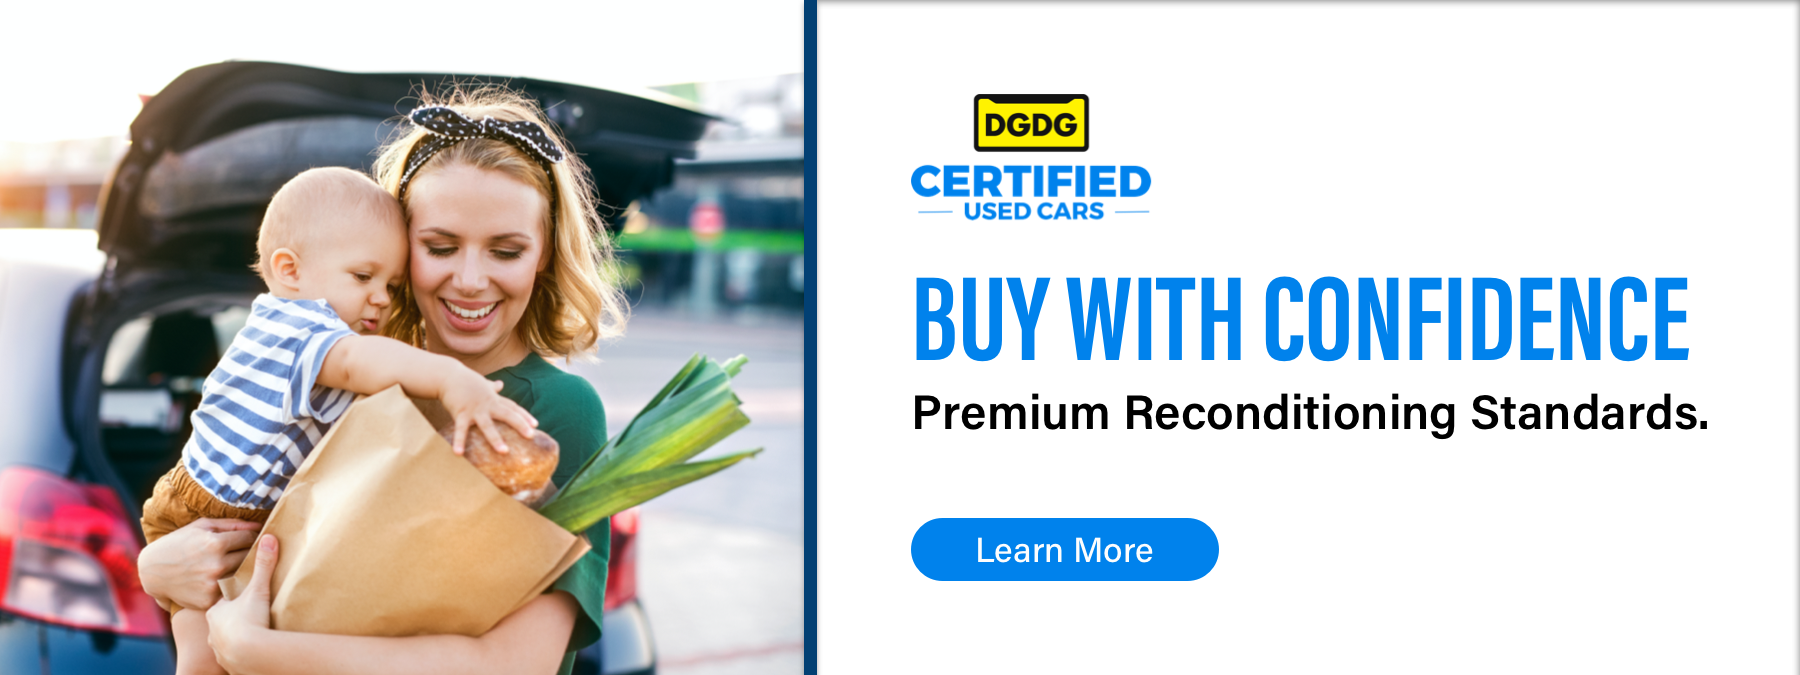 DGDG Certified Used Cars, Buy with Confidence, Premium Reconditioning Standards., Learn More